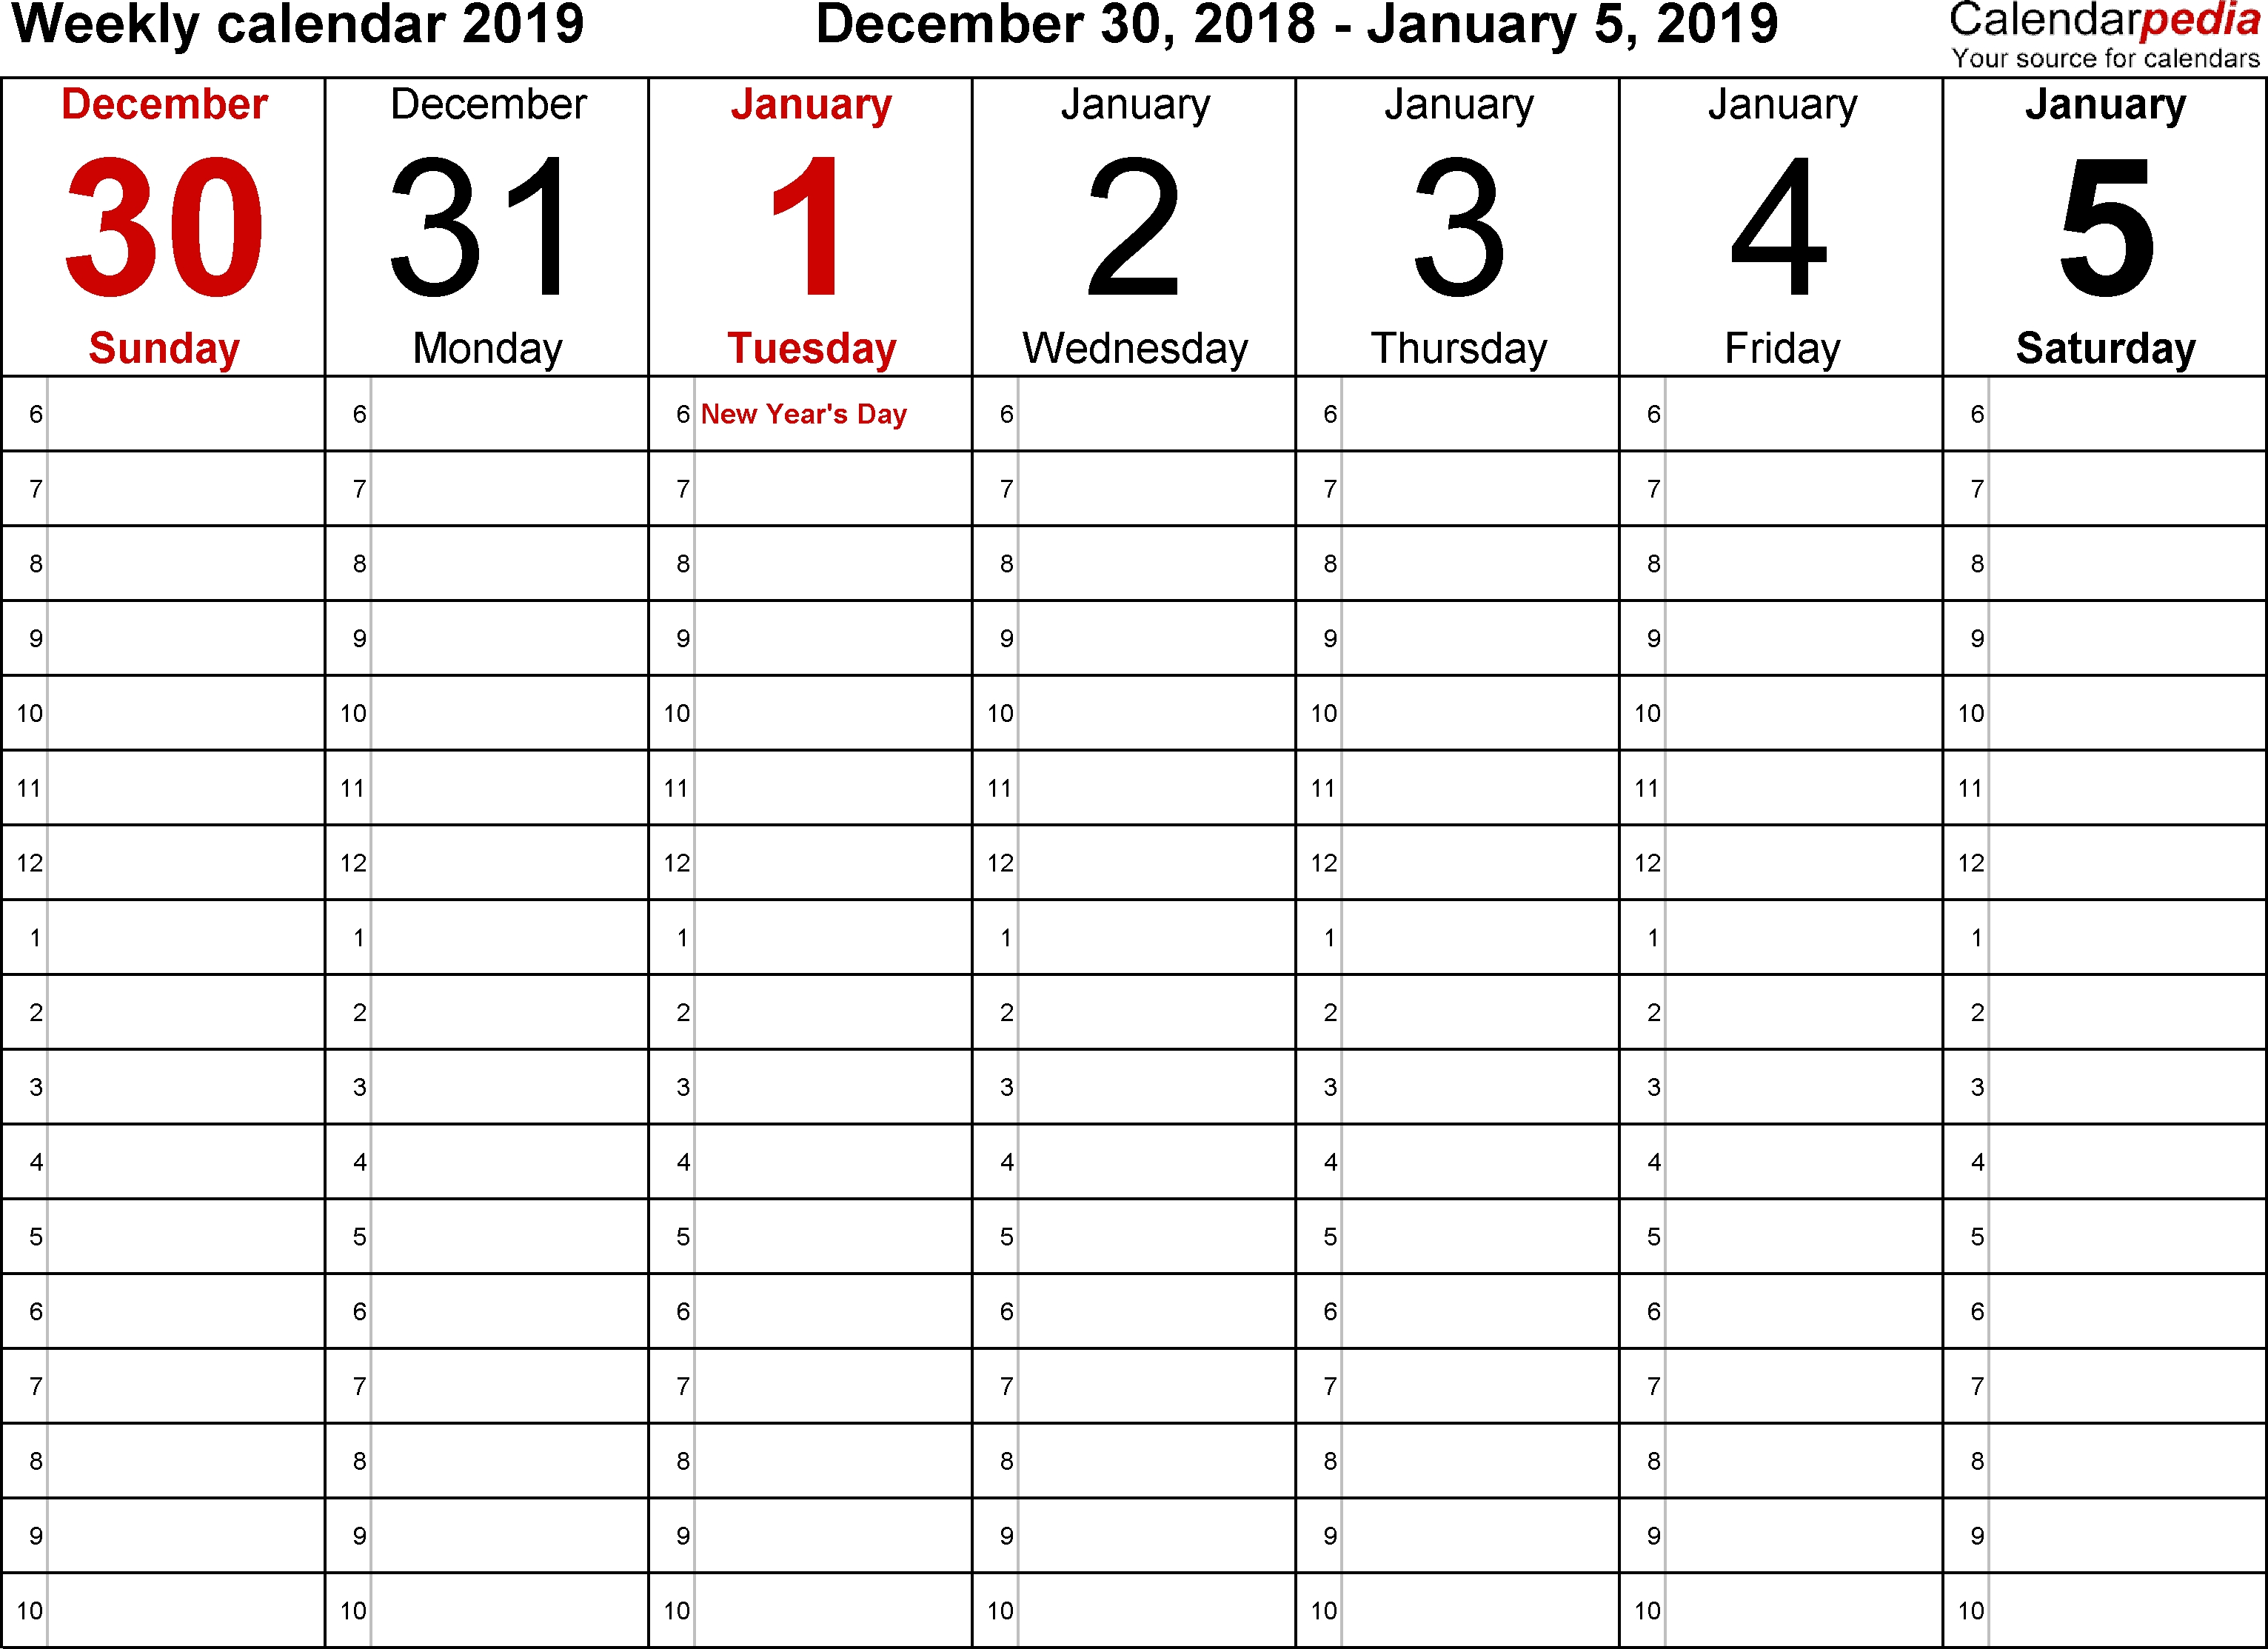 Weekly Calendar 2019 For Excel - 12 Free Printable Templates inside 30 Day Calendar Template Excel